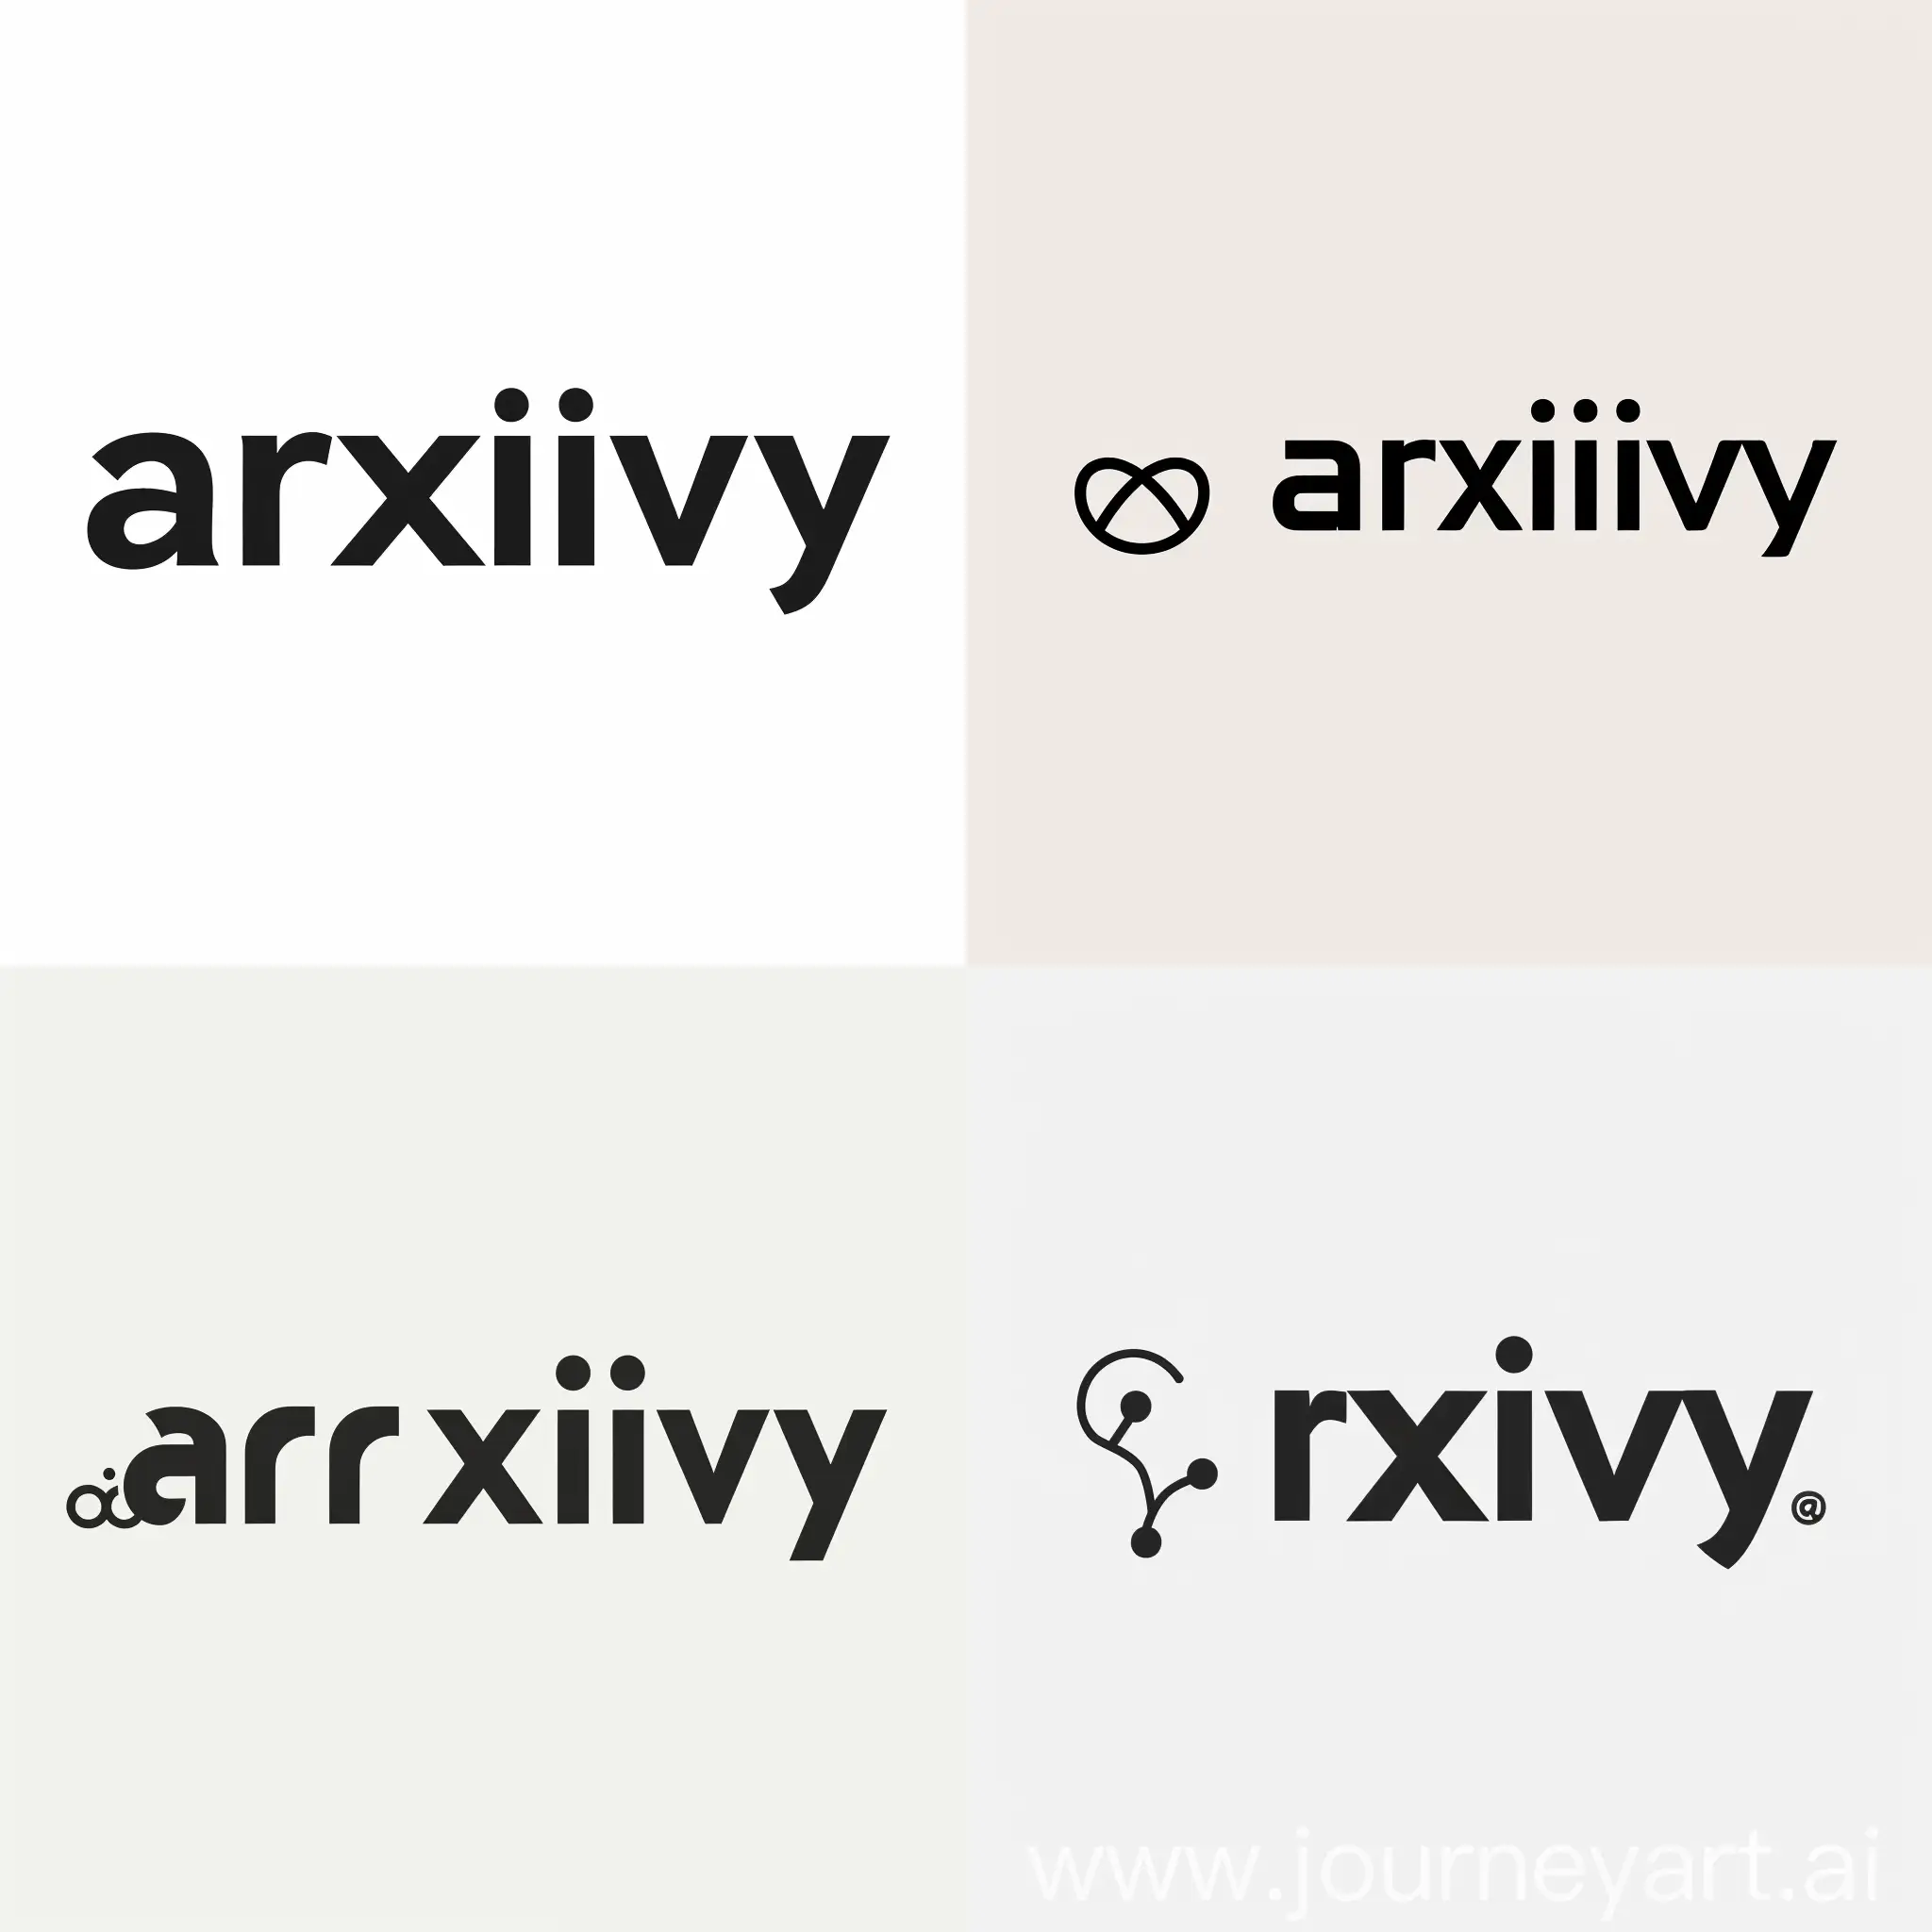 I need a logo to a company called ArXivy. My thinking is for the logo to consist of the company name in black bold letters and to its left some descriptive symbol of archiving as a business. That business is about multi modal archiving involving papers, audio, image and video. 